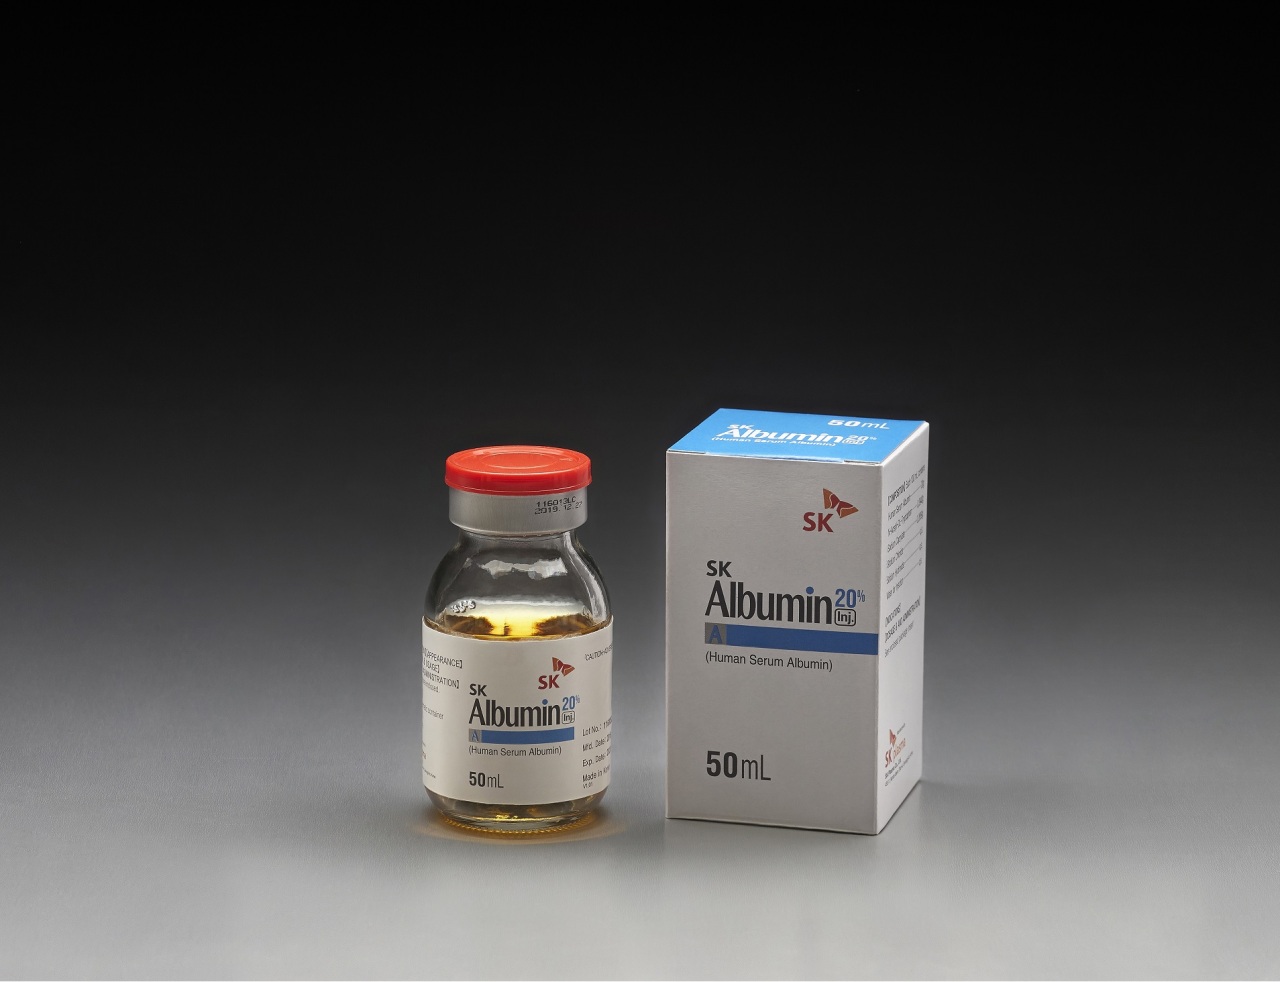 SK Albumin will be supplied as essential medicine to the Afghan National Army Territorial Force from the third quarter of 2020. (SK Plasma)